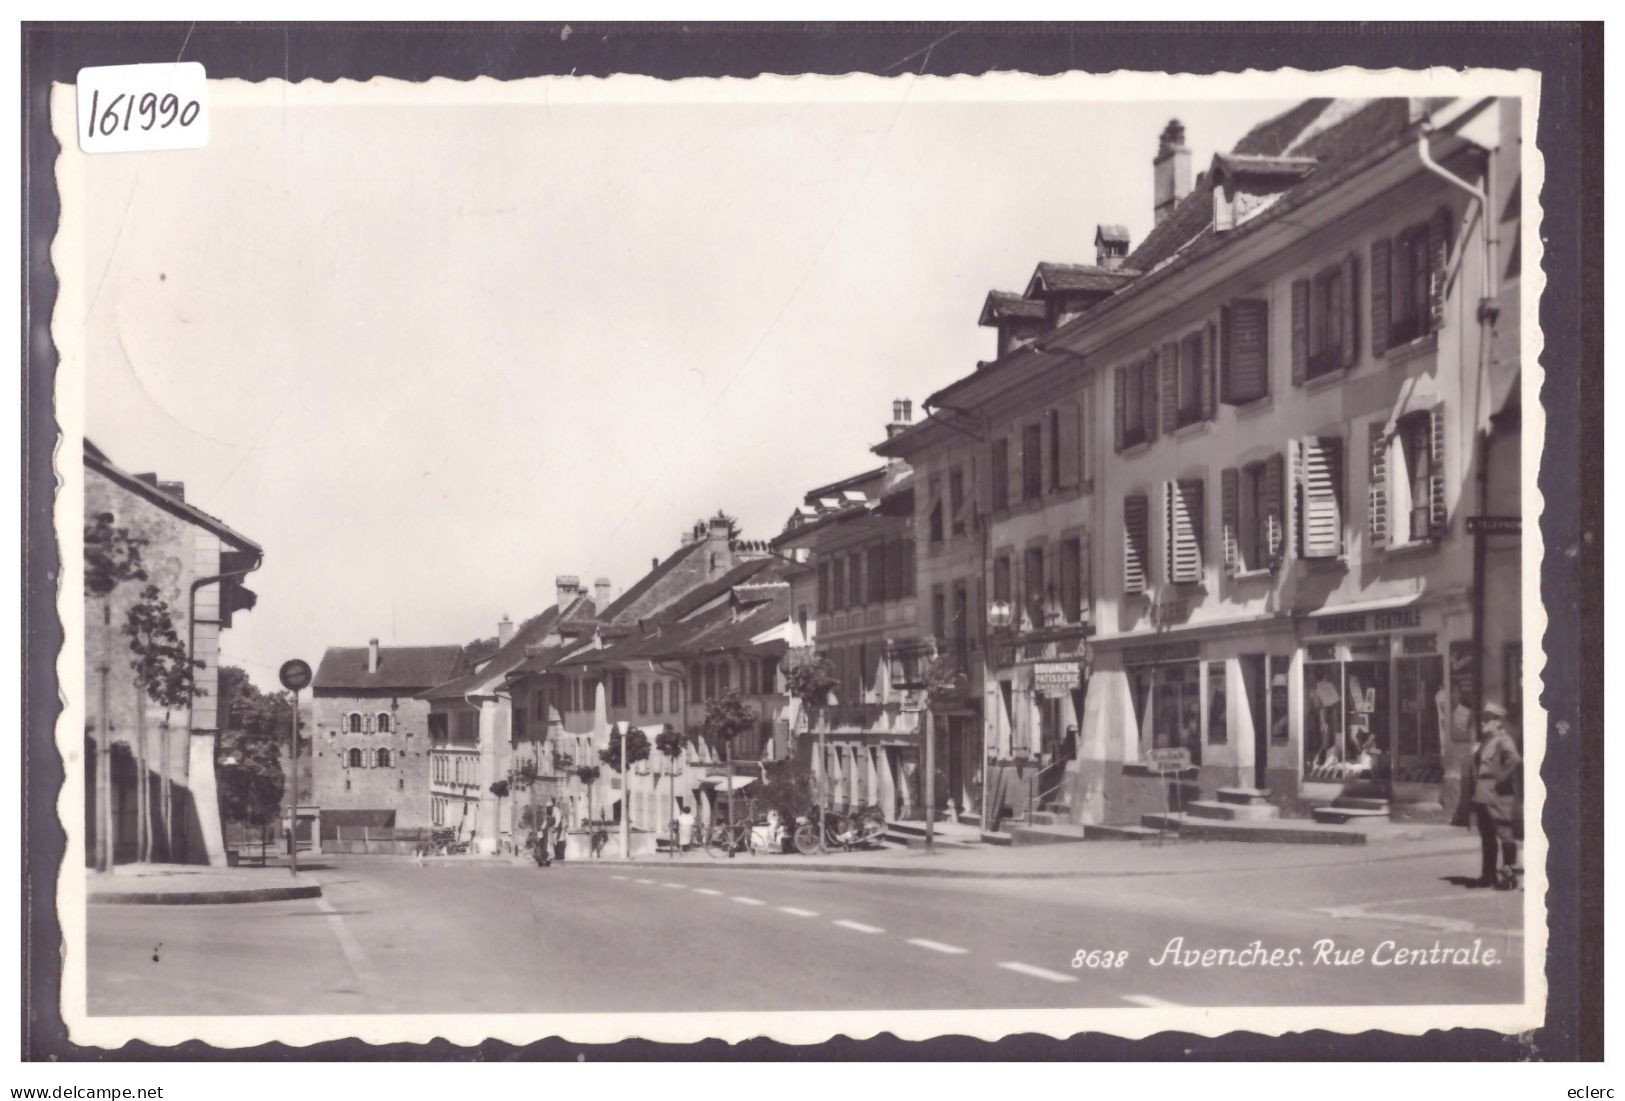 DISTRICT D'AVENCHES - AVENCHES - RUE CENTRALE - TB - Avenches